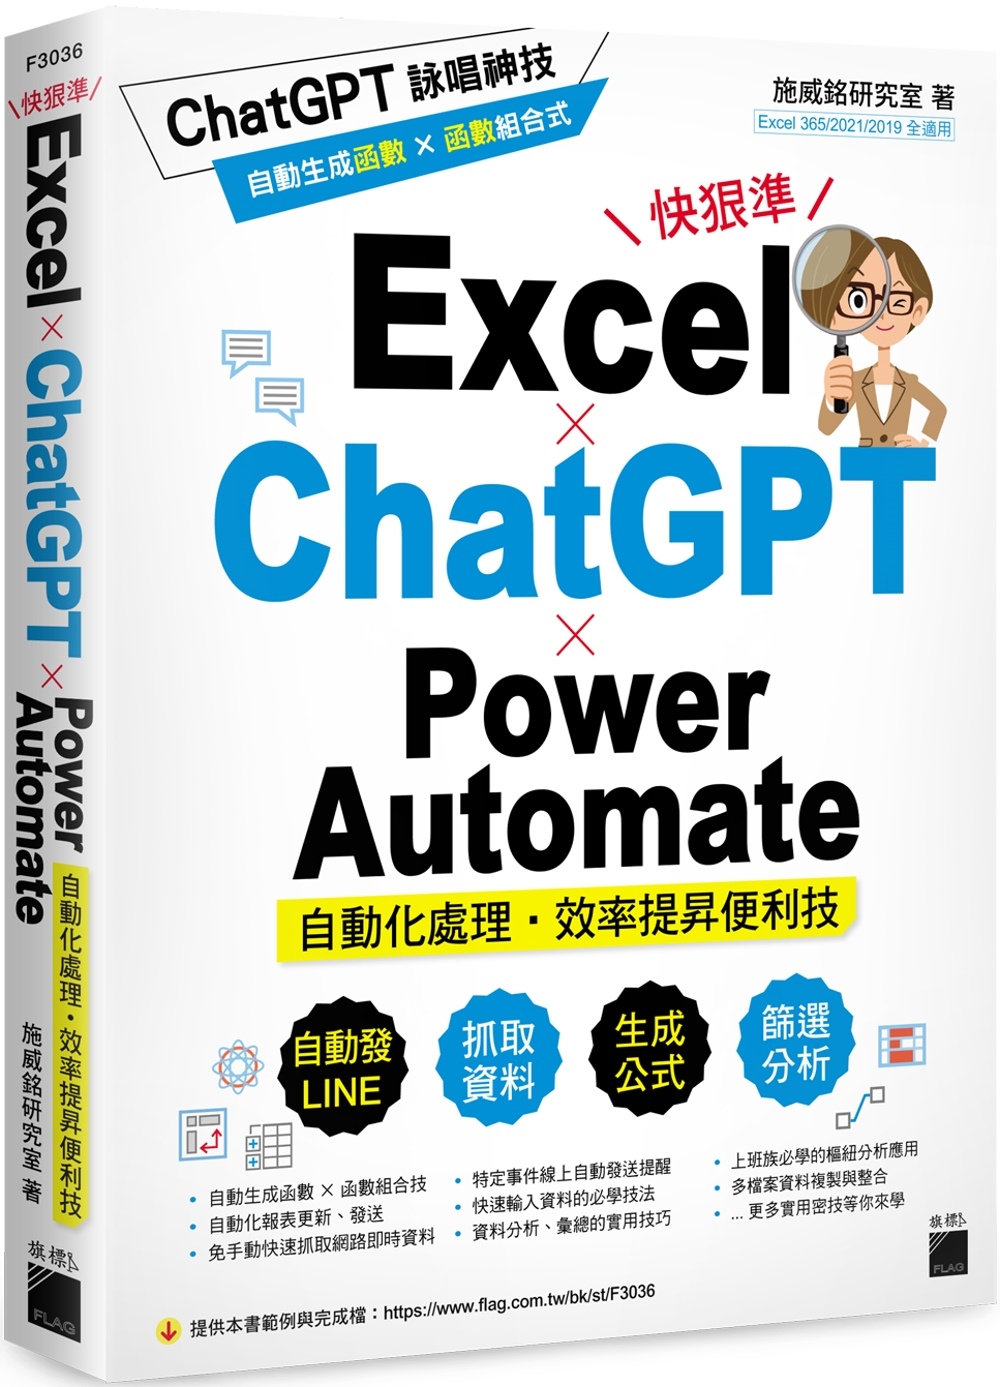 Excel × ChatGPT × Power Automa...